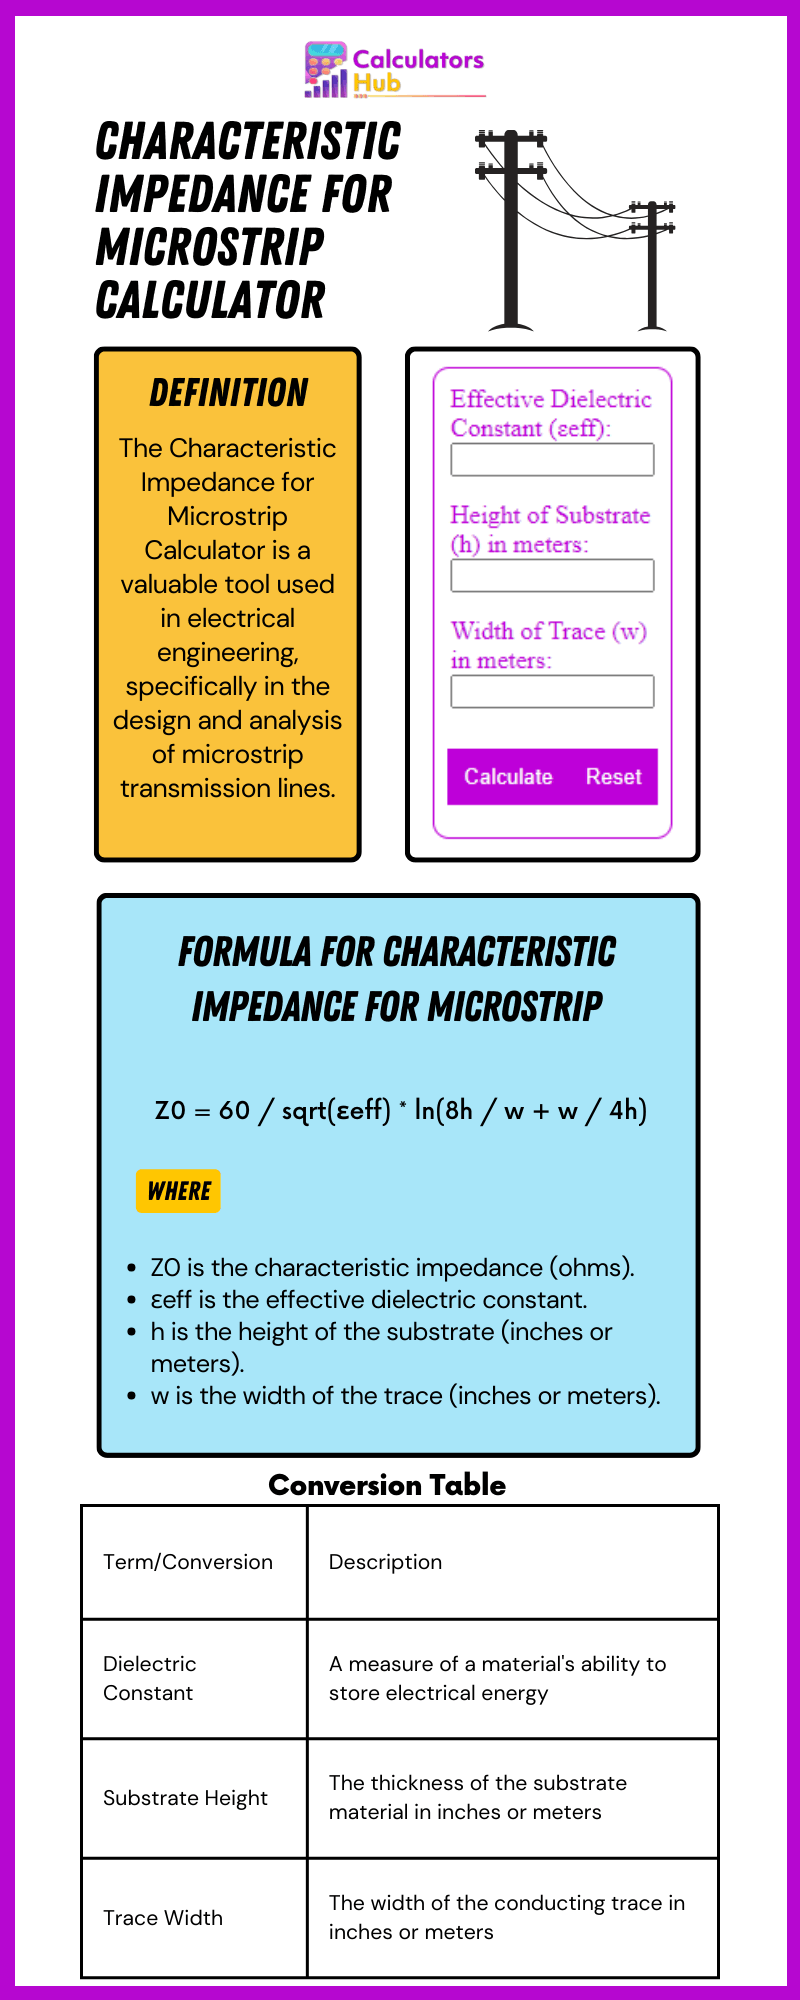 Characteristic Impedance for Microstrip Calculator